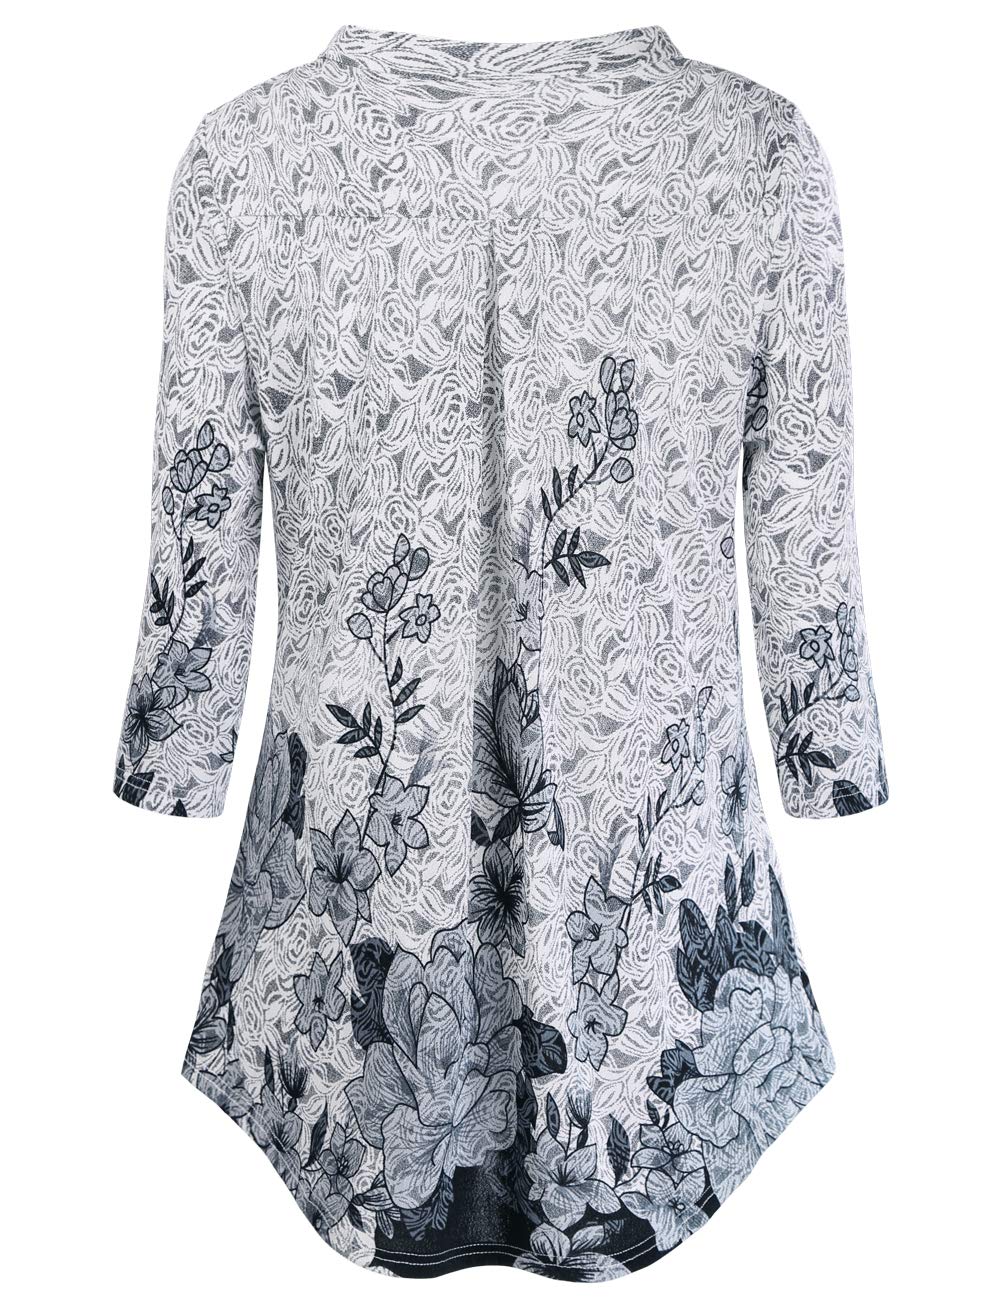 BAISHENGGT Grey Peony Womens  Floral Printed Notch V Neck Blouses Tunics Tops